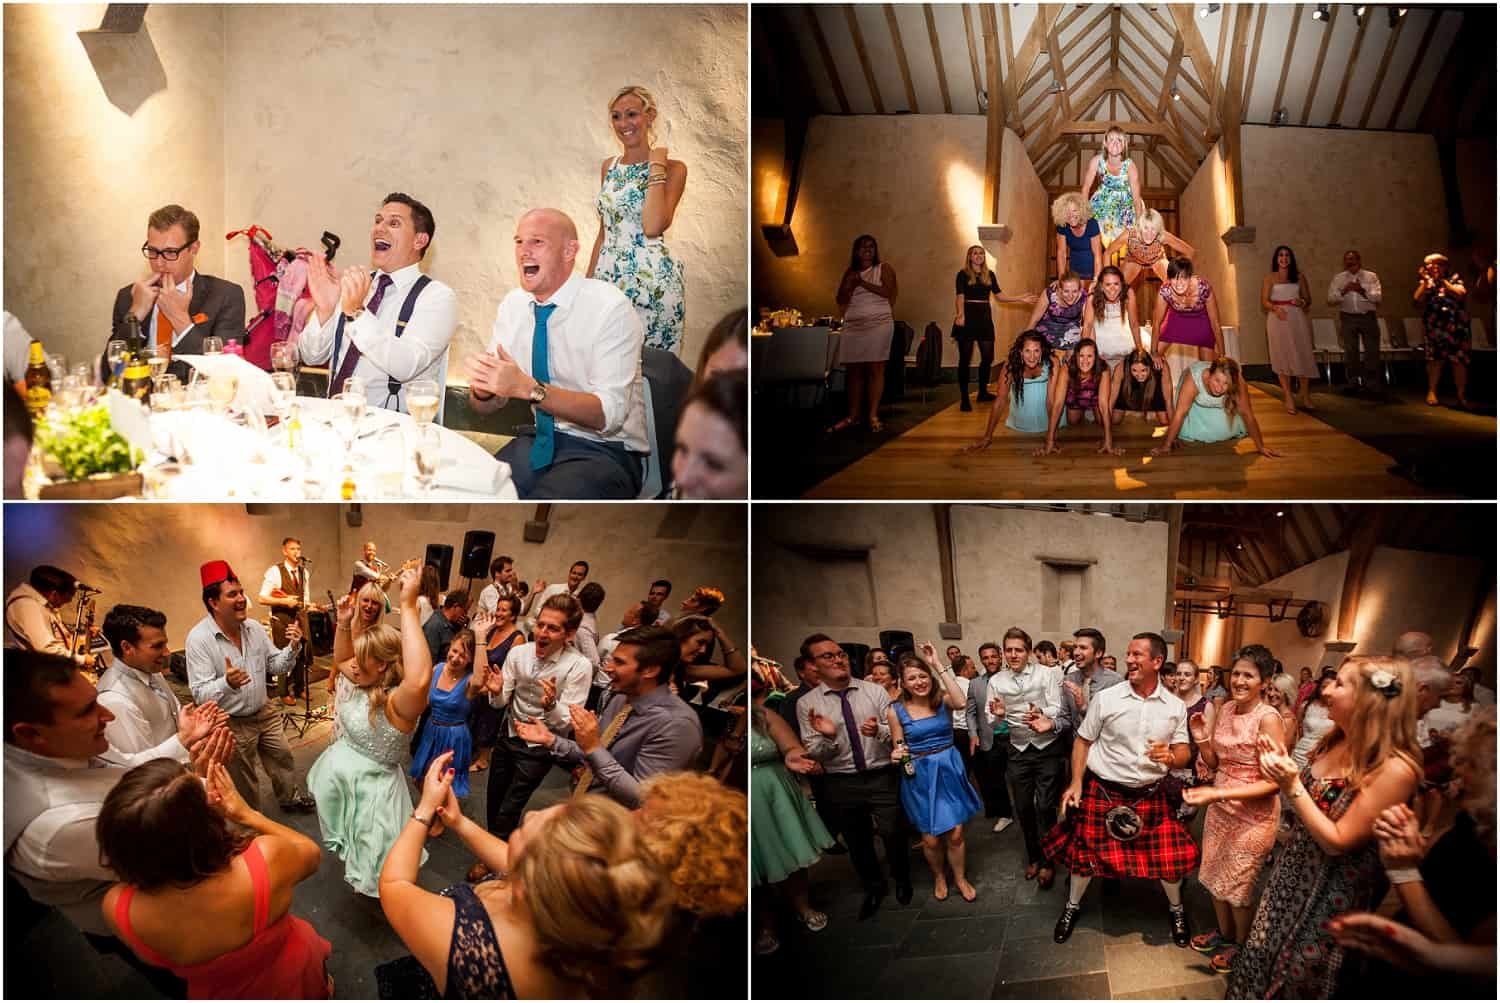 Kate & Neil's Devon Barn Wedding. With Images by Chris Morgan